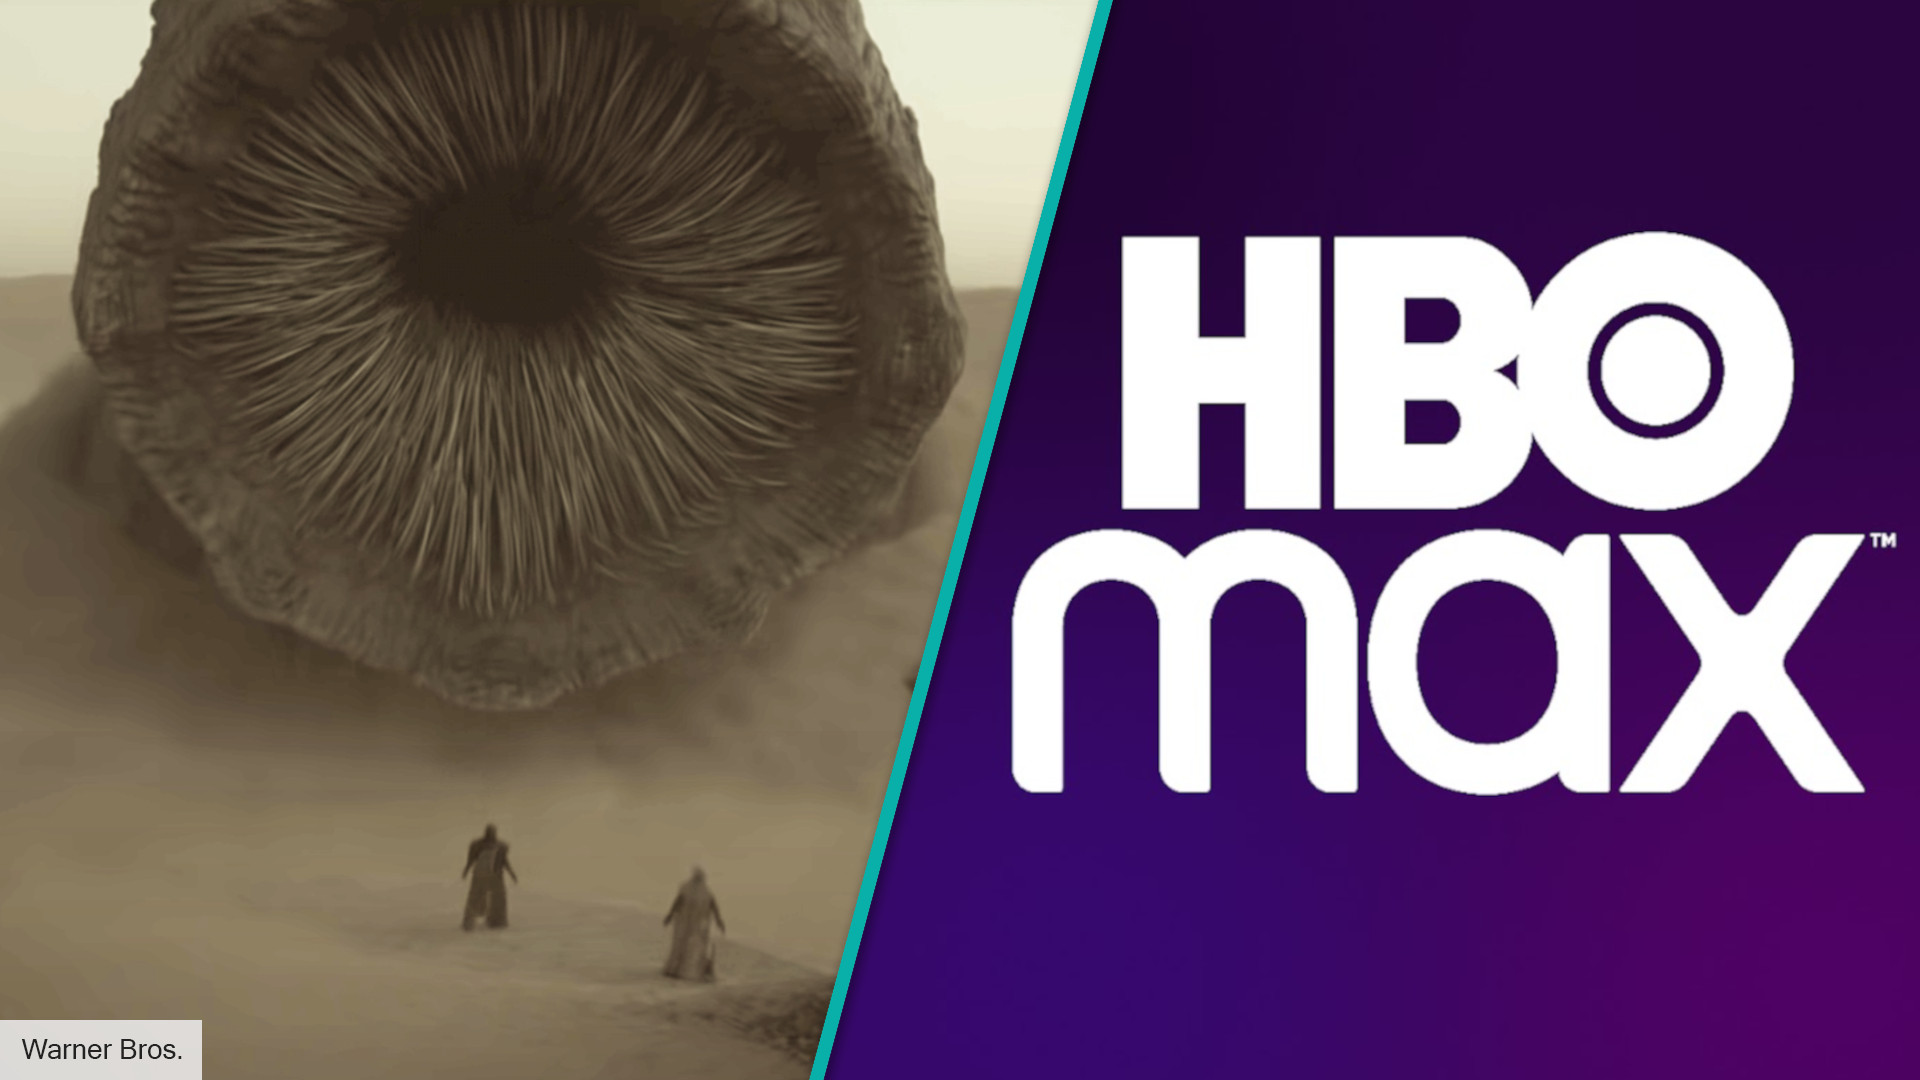 Dune is now streaming on HBO Max